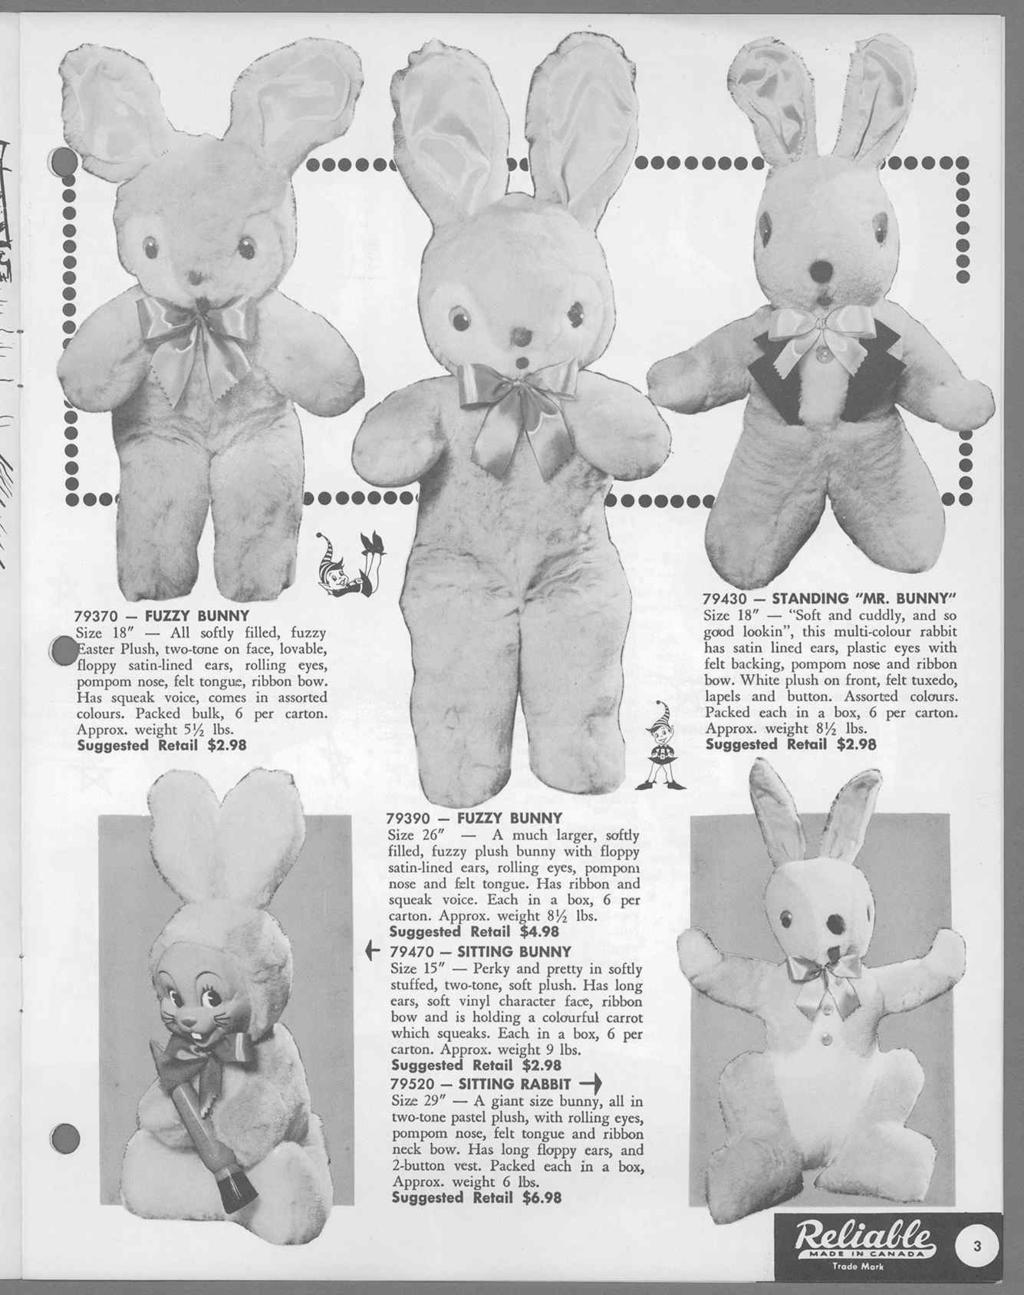 ,,\ L.,z kro 4 79370 FUZZY BUNNY Size 18" All softly filled, fuzzy Plush, two-tone on face, lovable, floppy satin-lined ears, rolling eyes, pompom nose, felt tongue, ribbon bow.